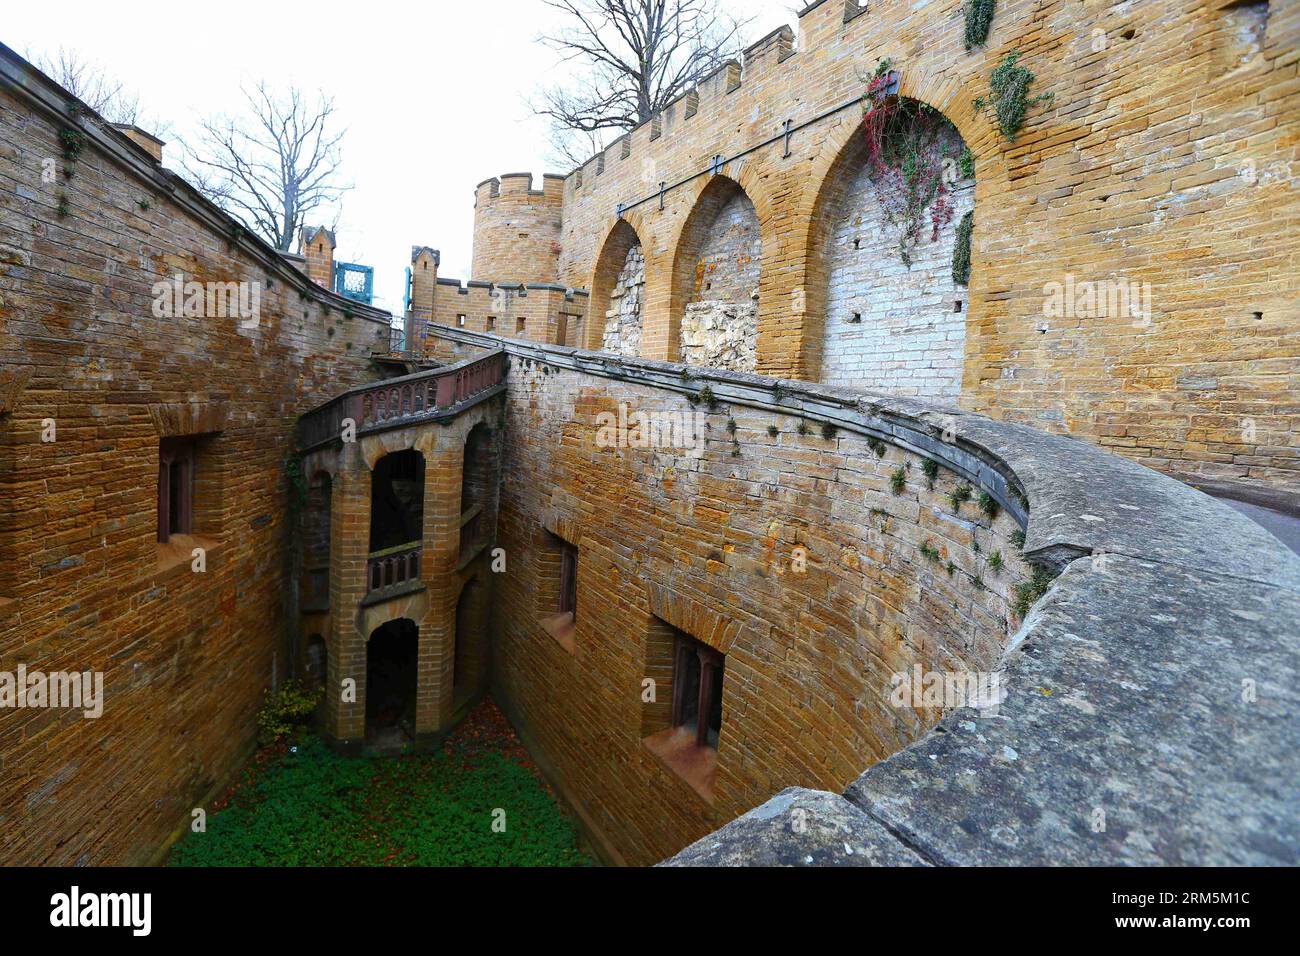 Bildnummer: 60684832  Datum: 02.11.2013  Copyright: imago/Xinhua Photo taken on Nov. 2, 2013 shows a part of the Burg Hohenzollern in Hechingen, Germany. Burg Hohenzollern is a castle considered to be the ancestral seat of the Hohenzollern family, which emerged in the Middle Ages and eventually became German Emperors. The castle was first constructed in the early 11th century and completely destroyed in 1423. The current version of the castle was rebuilt in mid-19th century. The castle becomes a popular tourist destination today as it is still privately owned by the descendants of the Hohenzol Stock Photo